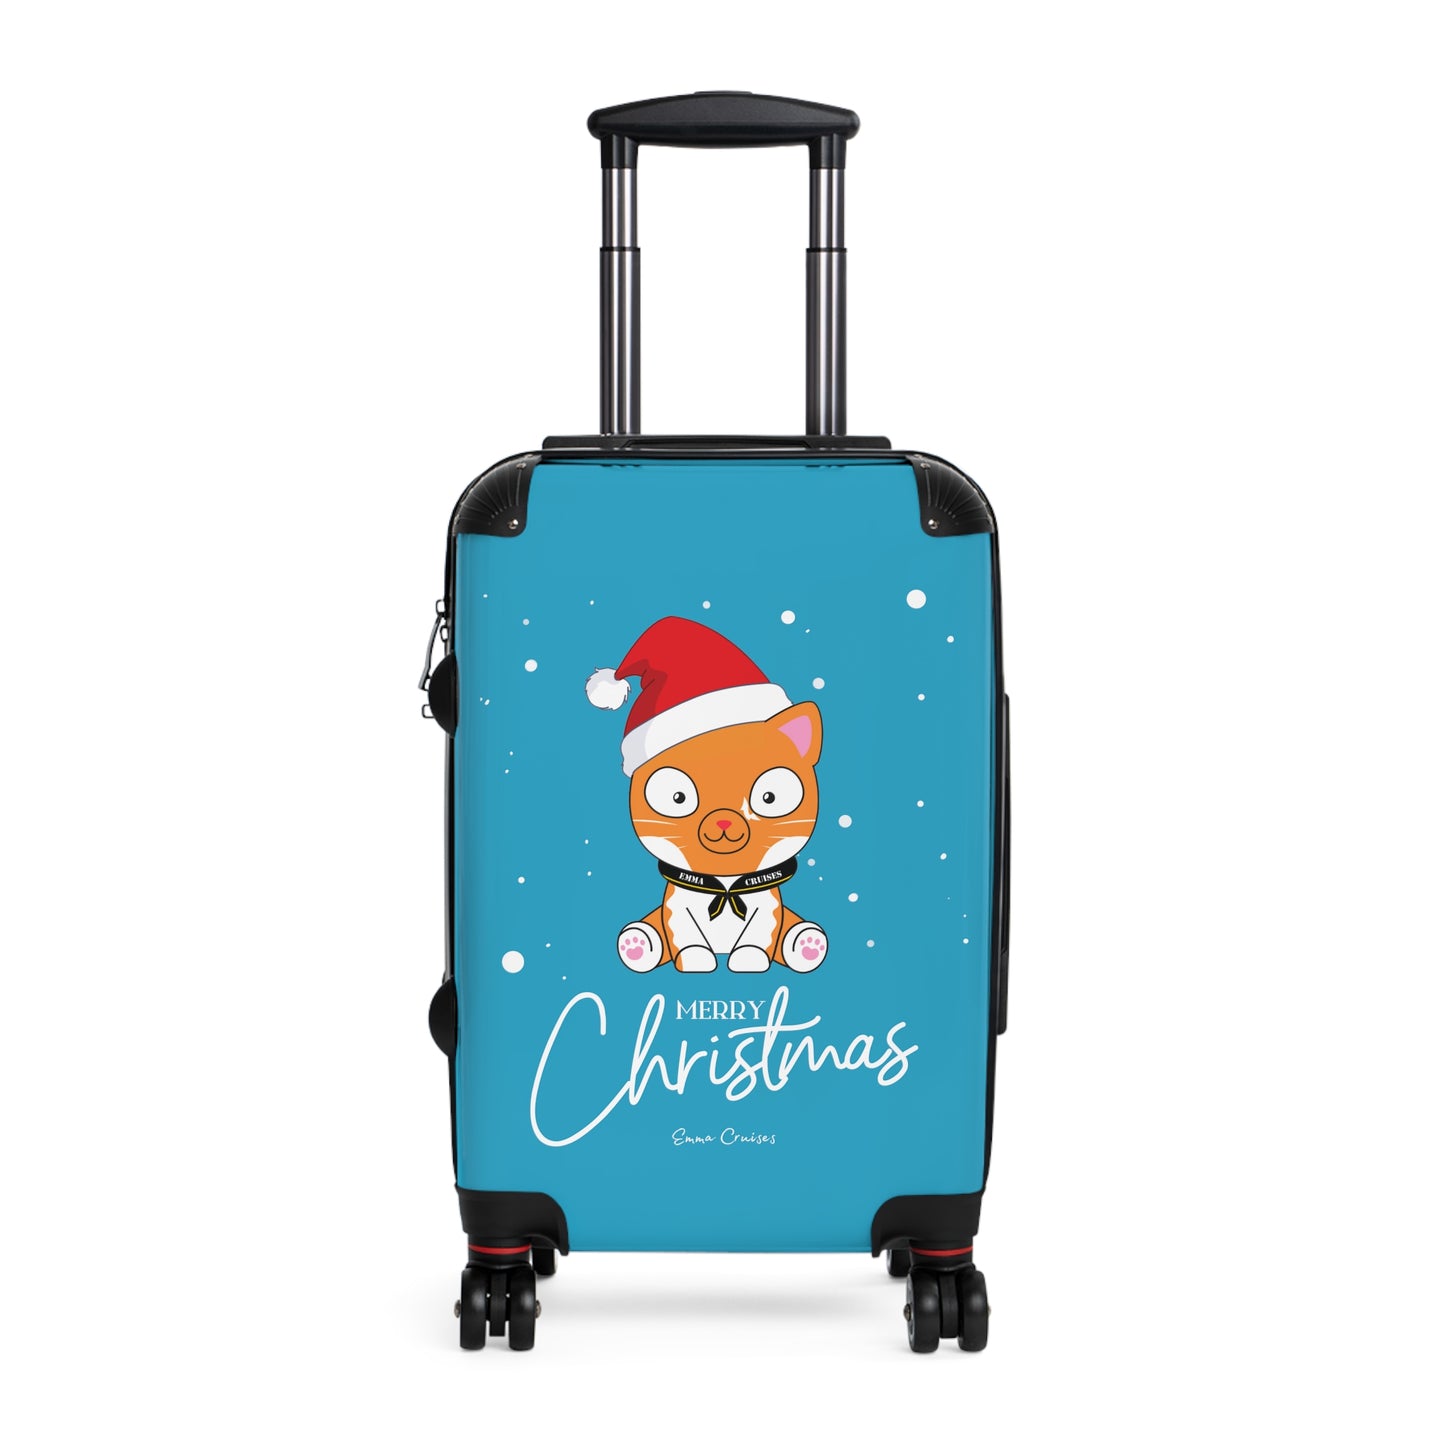 Merry Christmas - Suitcase